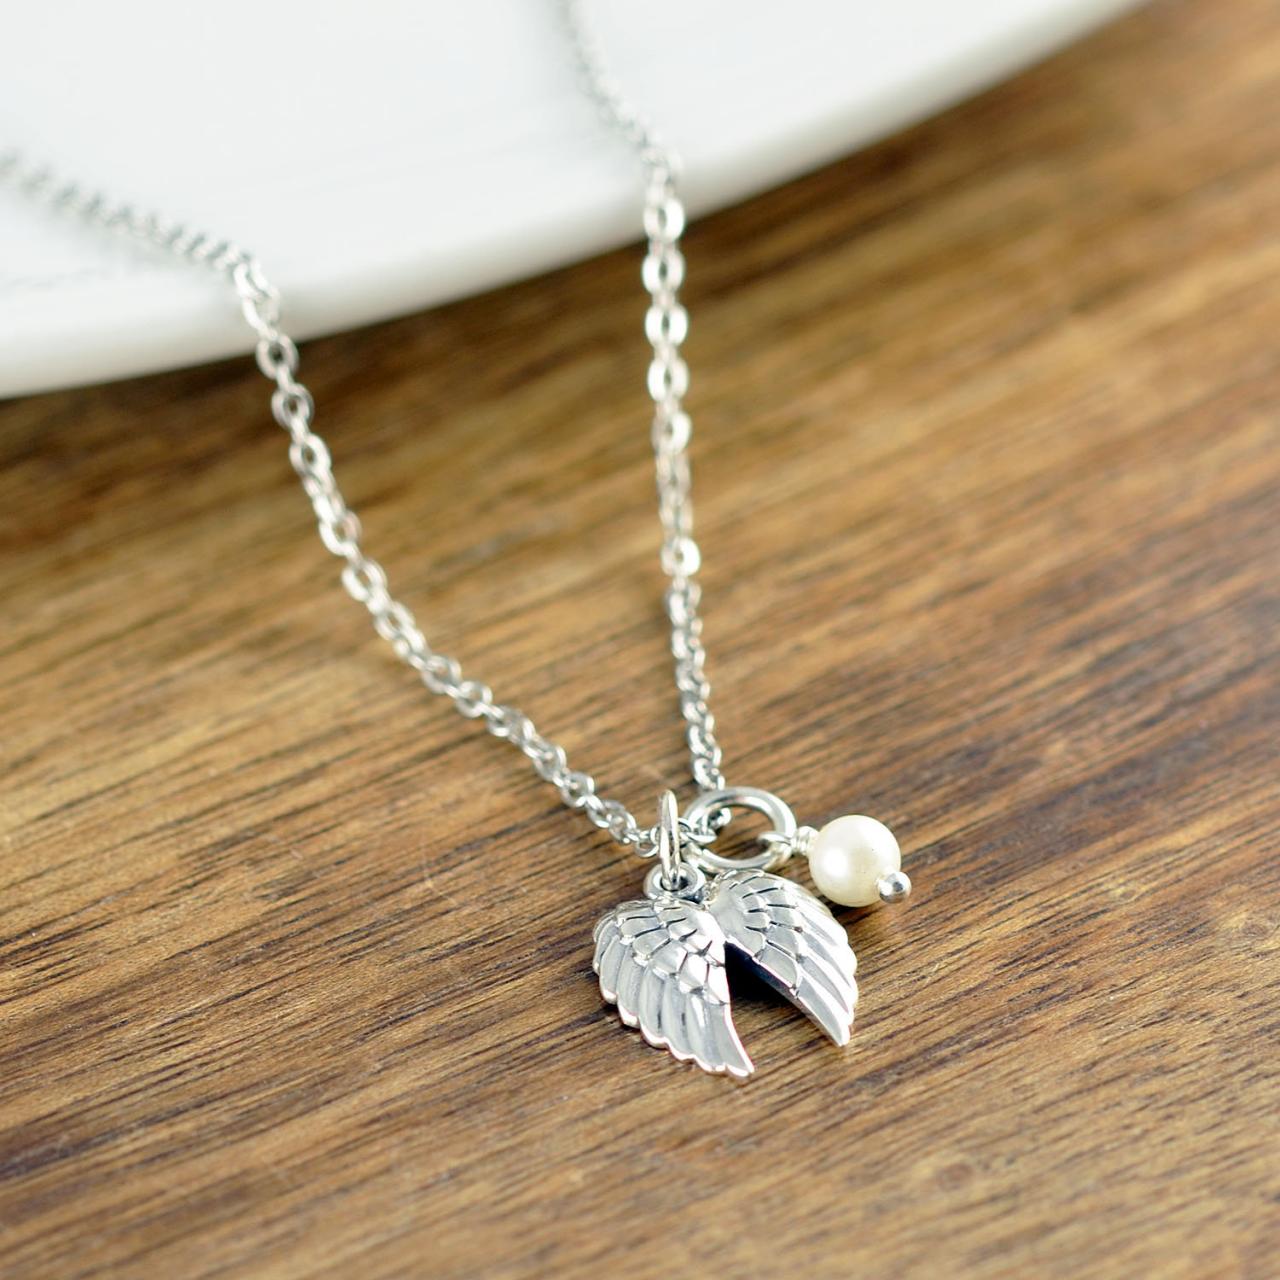 Angel Wings Necklace, Wing Necklace, Sympathy Necklace, Memorial Necklace, Memorial Jewelry, Remembrance Gifts, Loss Gift, Loss of Loved One